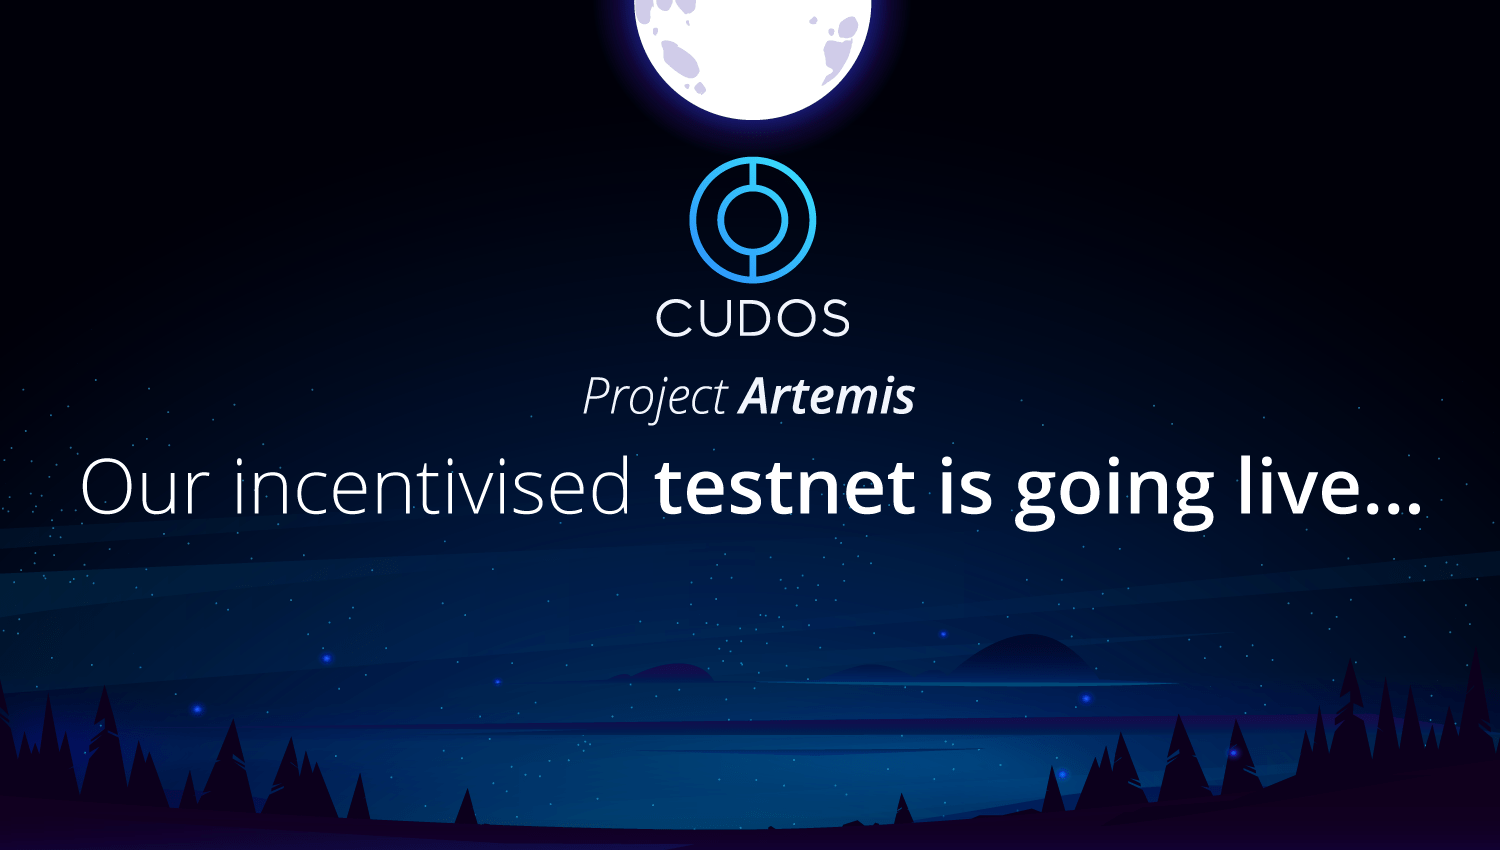 We’re launching phase one of our incentivised testnet – Project Artemis